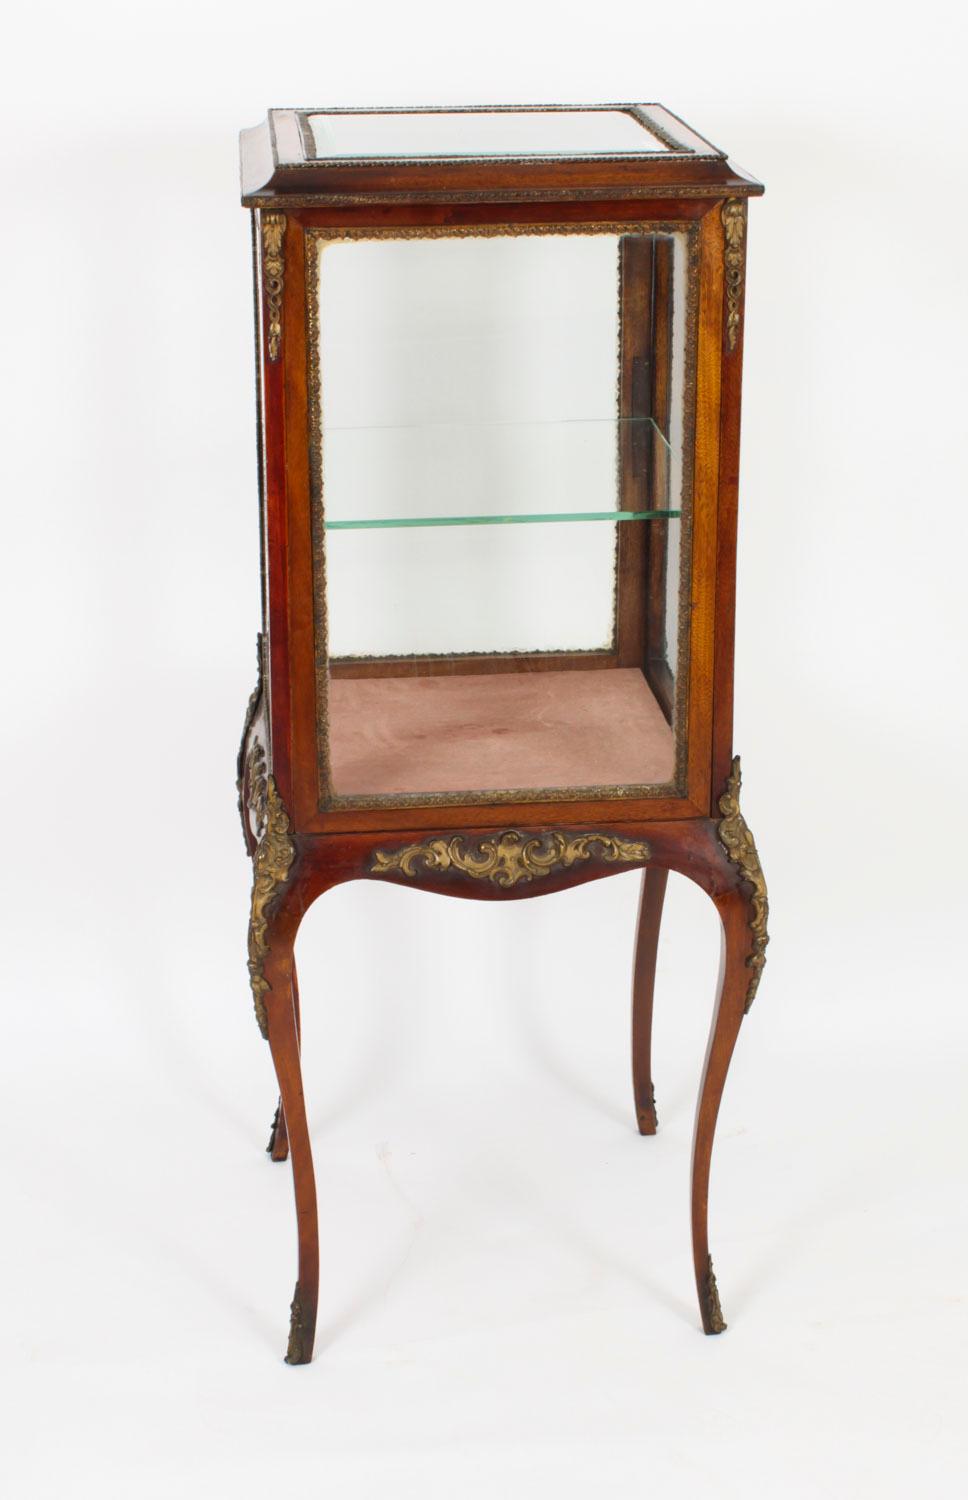 Antique Square Ormolu Mounted Vitrine Display Cabinet 19th Century For Sale 7